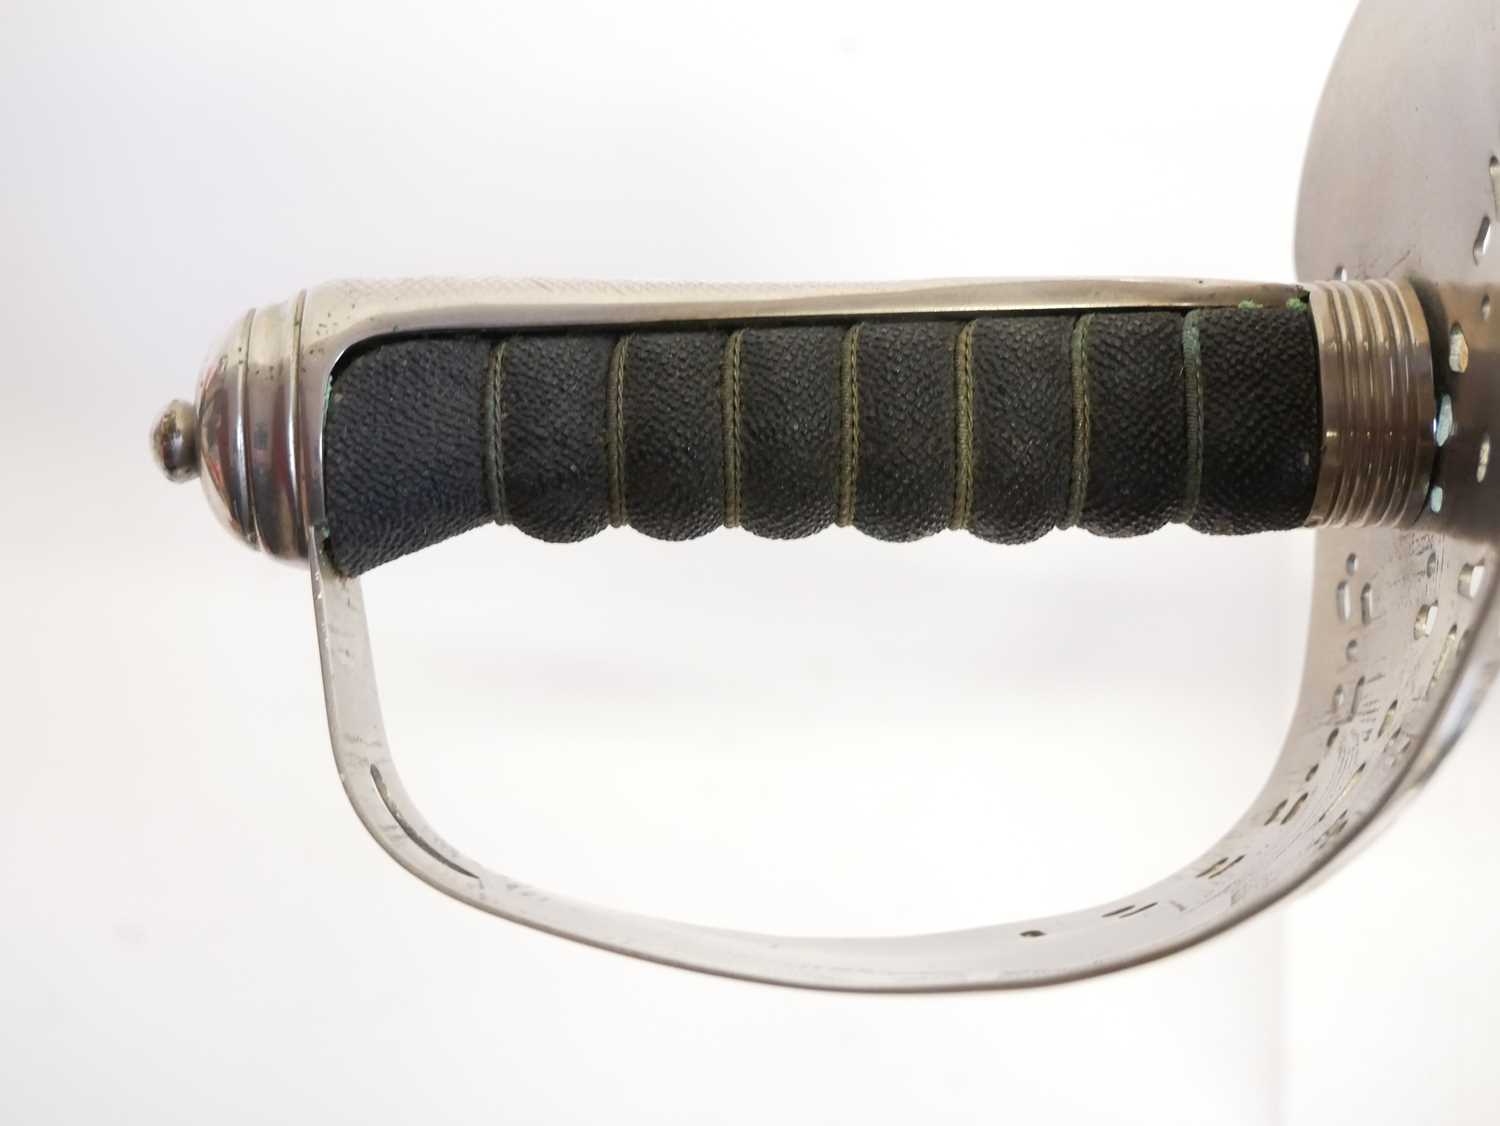 ERII 1897 pattern NCO sword and scabbard, double fullered proved blade, with pierced guard with - Image 6 of 11